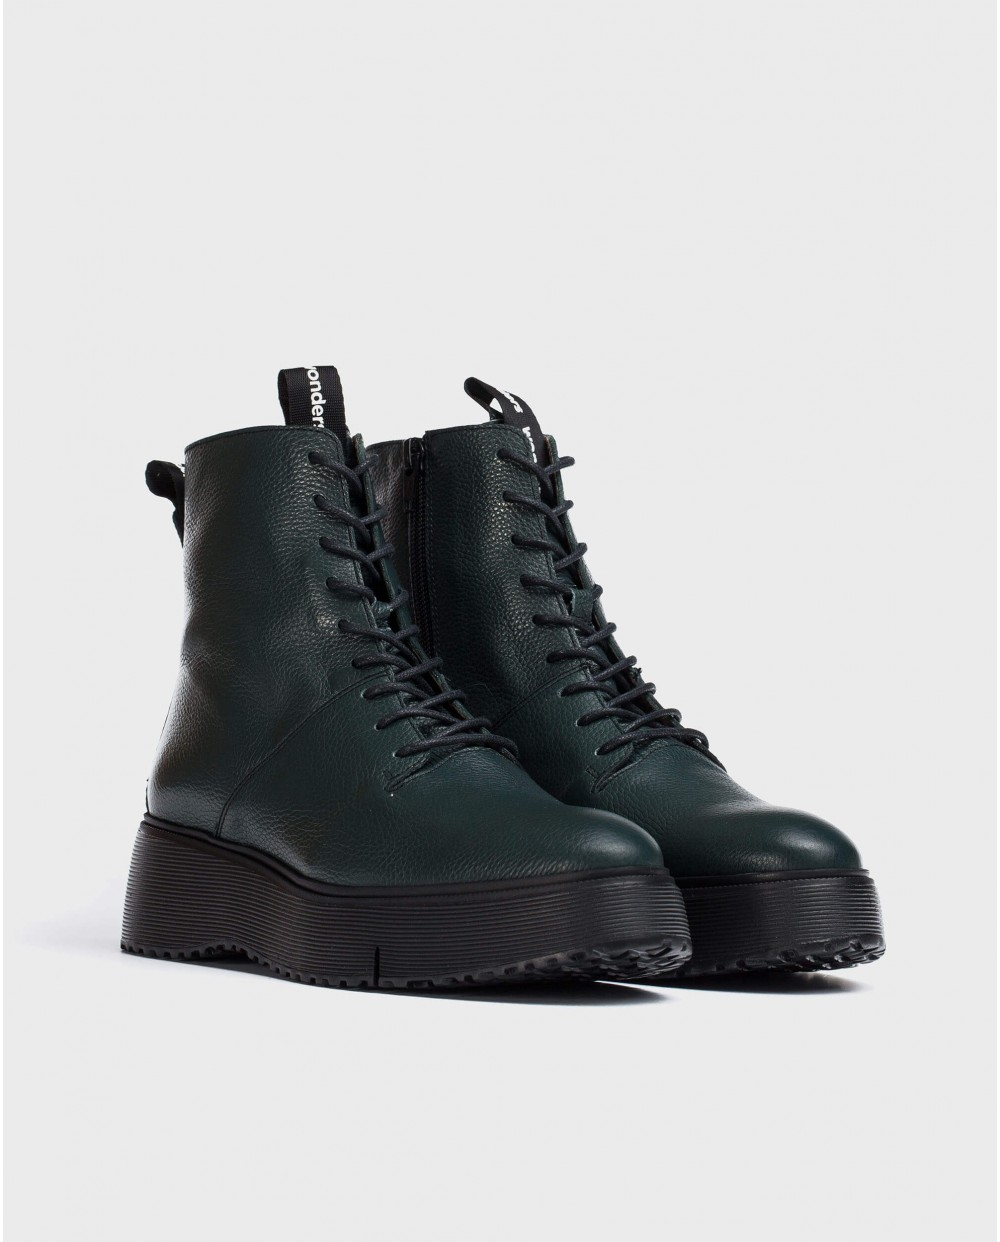 Wonders-NEW IN-Green Bristol Ankle boot